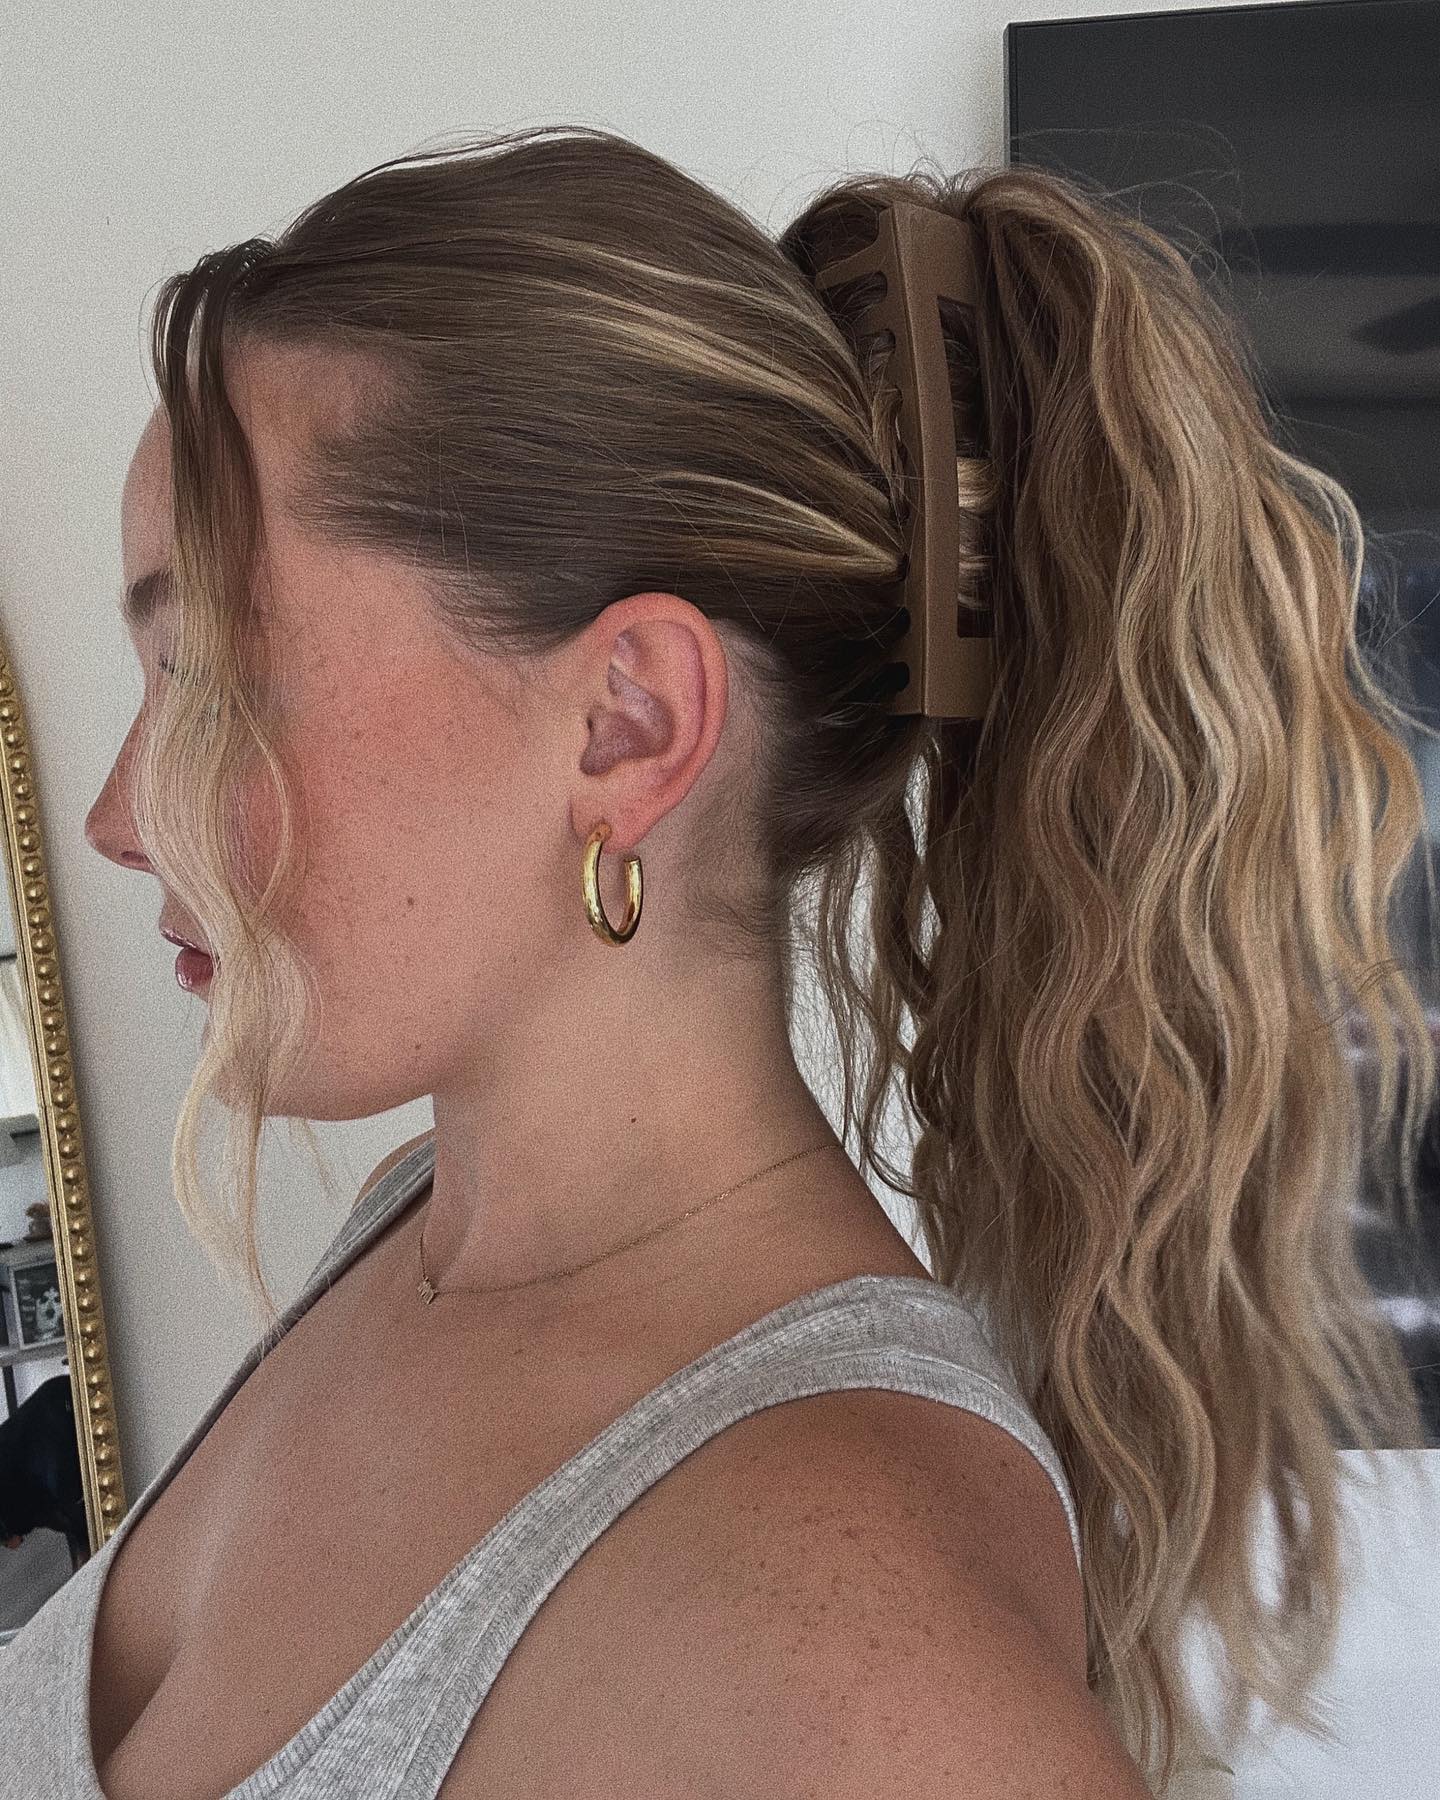 The claw clip hairstyle is more than a '90s trend - Vox